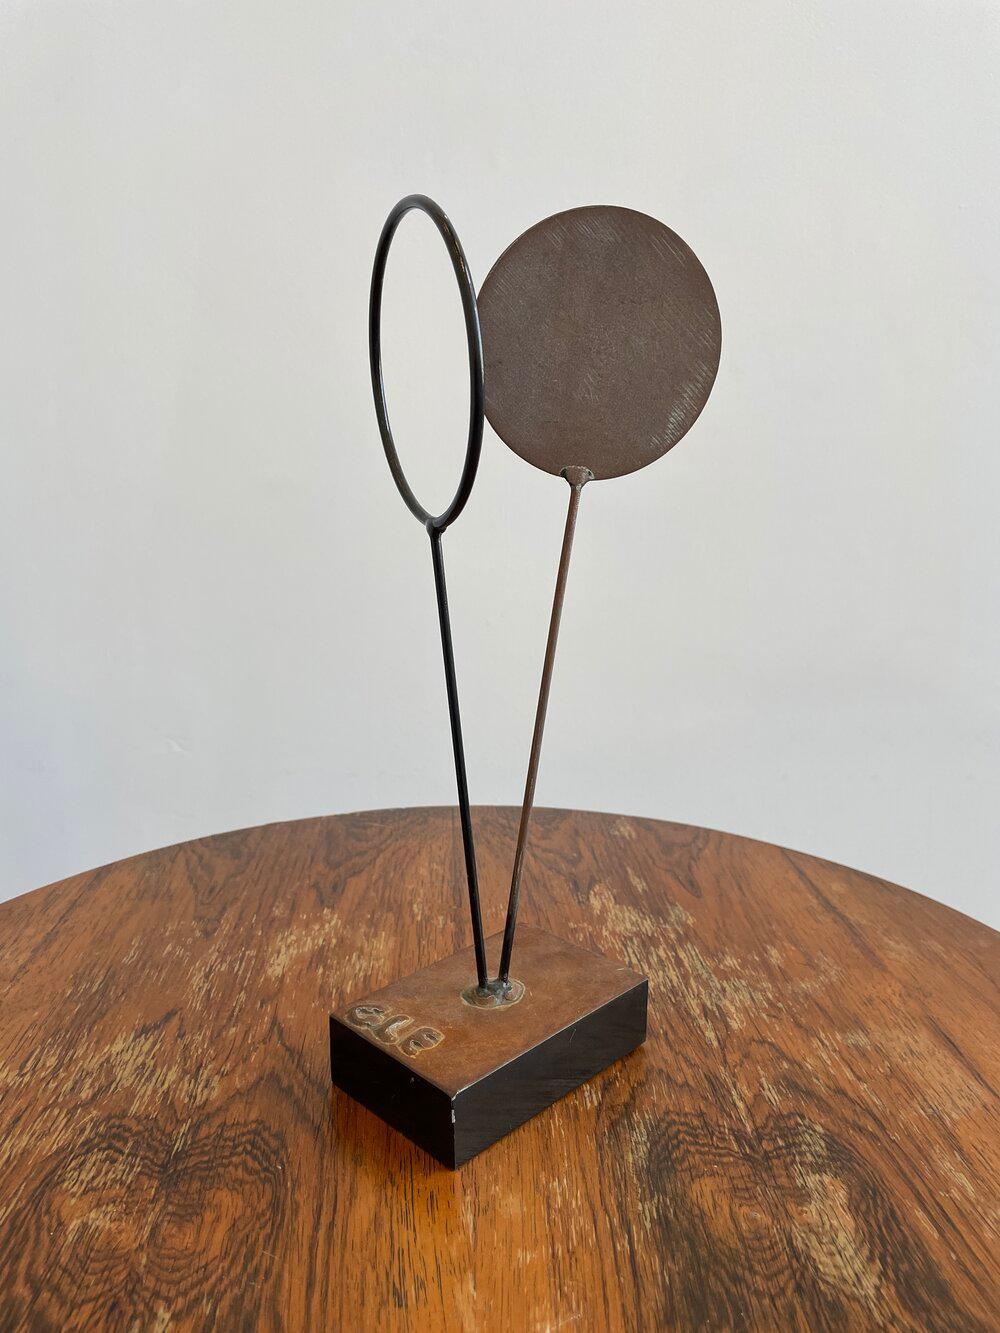 Brutalist disc and open circle sculpture Signed GLE on base

Additional information:
Materials: Steel
Period: 1950’s
Condition: In vintage good condition
Place of origin: Unknown
Dimensions: 14” H x 6” W x 5” D.